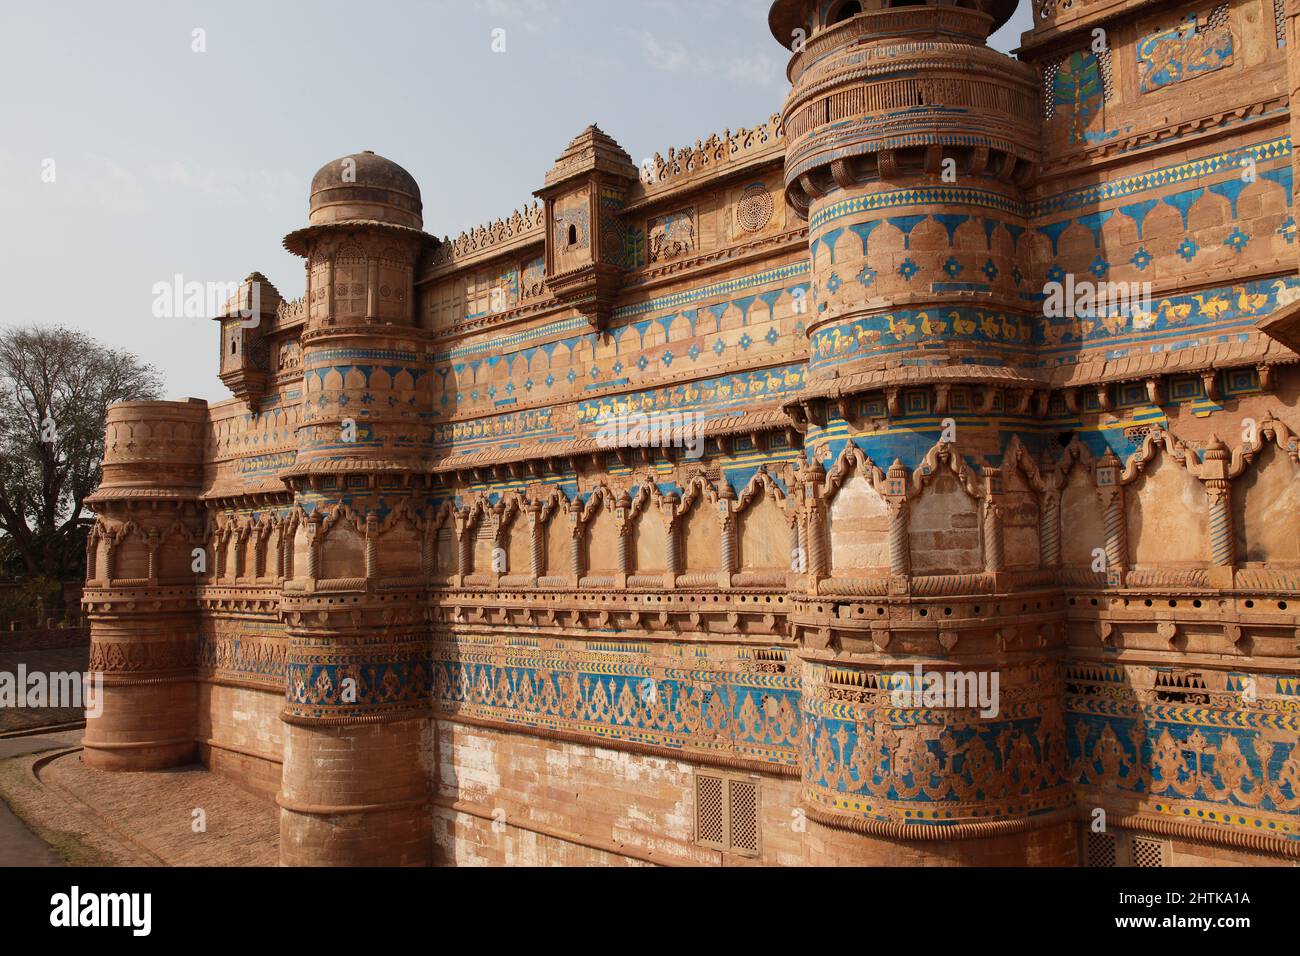 Rounded Bastions lavishly carved with decorative tilework on the South facade of Gwalior Fort , in Gwalior, Madhya Pradesh, India. Stock Photo